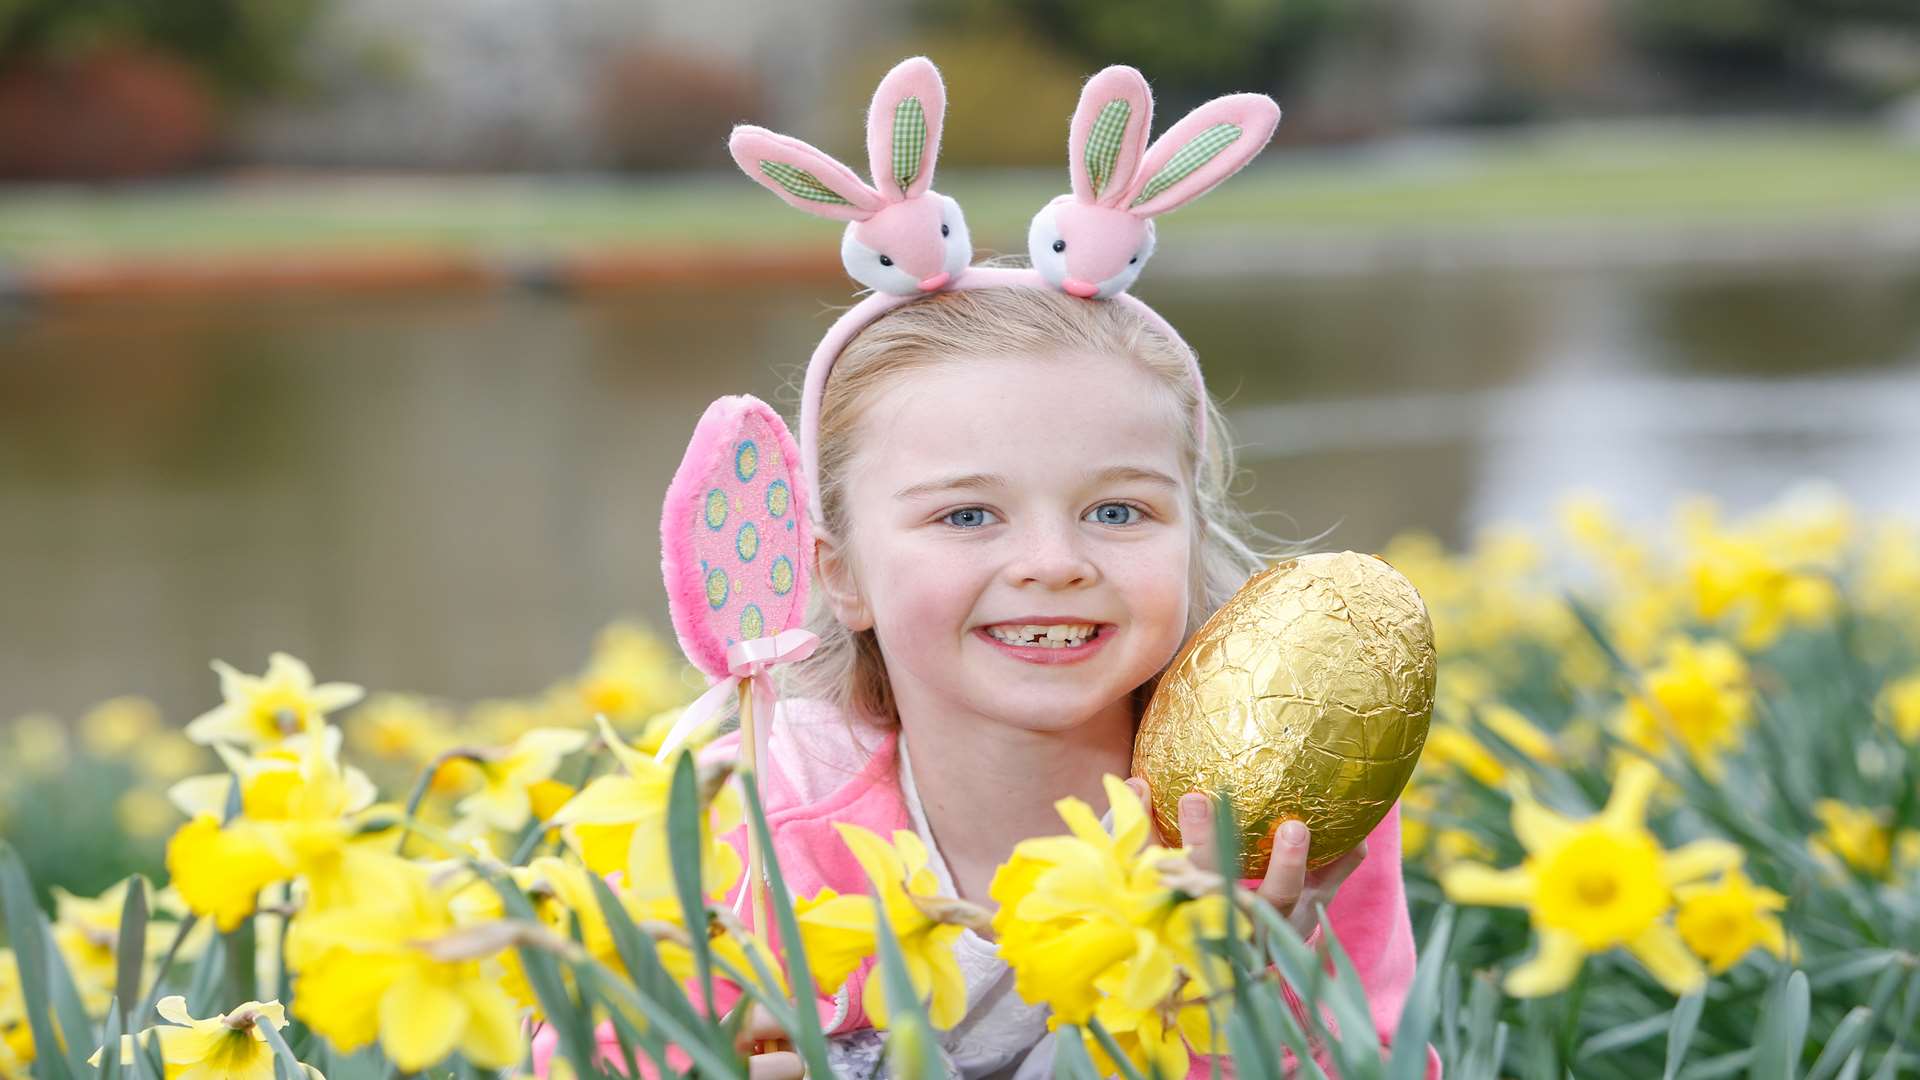 There's plenty on offer at Leeds Castle this Easter holidays.